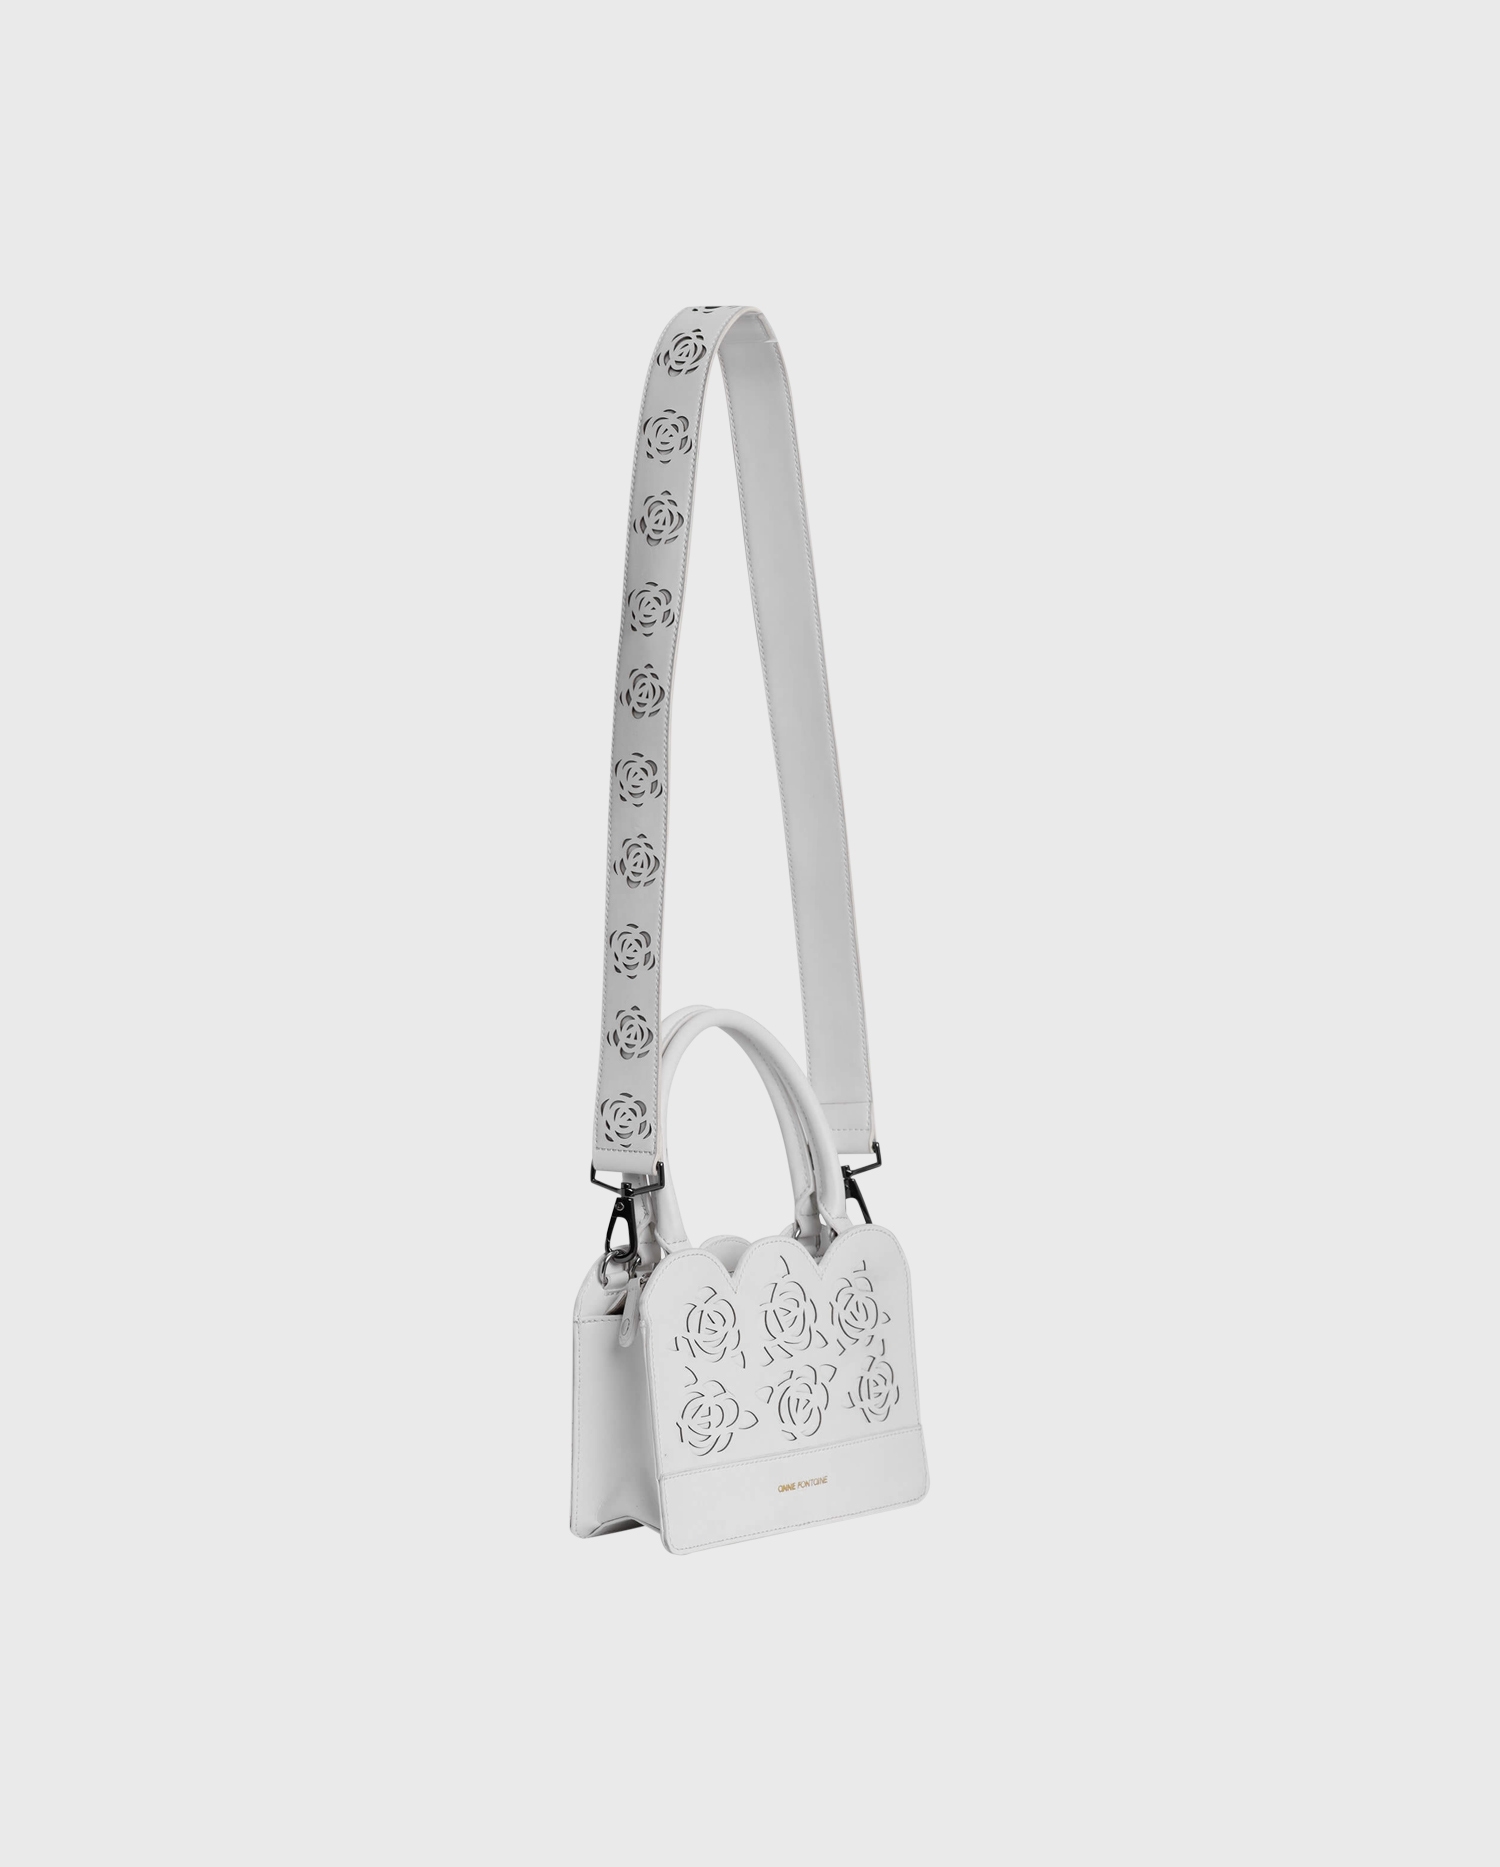 The IURY white leather floral handbag is the perfect companion piece.